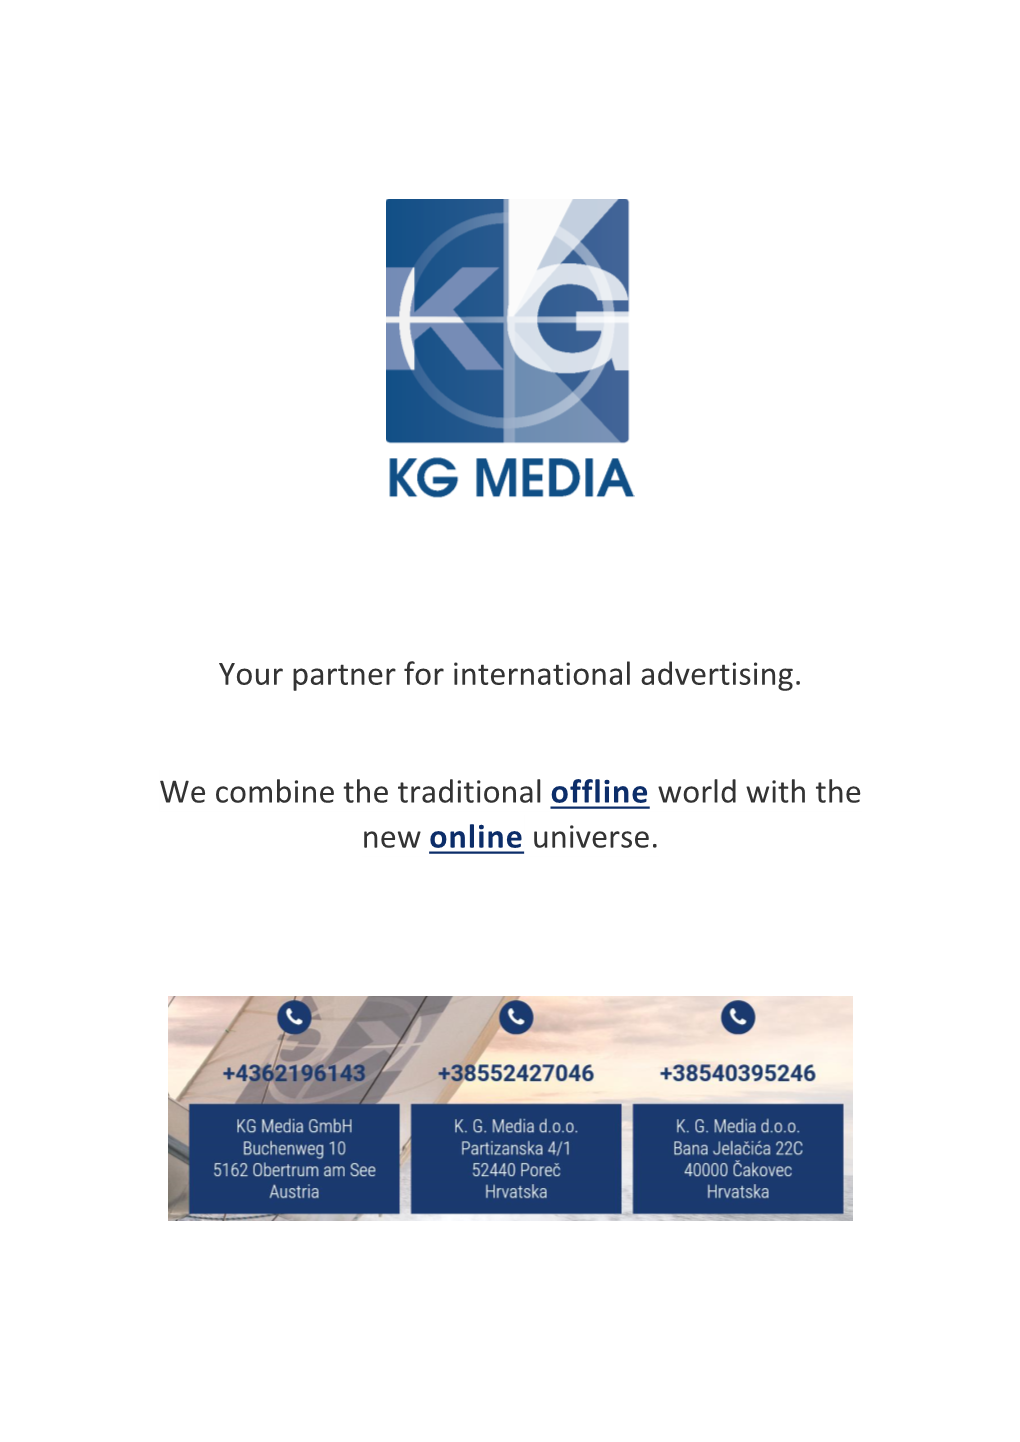 Your Partner for International Advertising. We Combine the Traditional Offline World with the New Online Universe